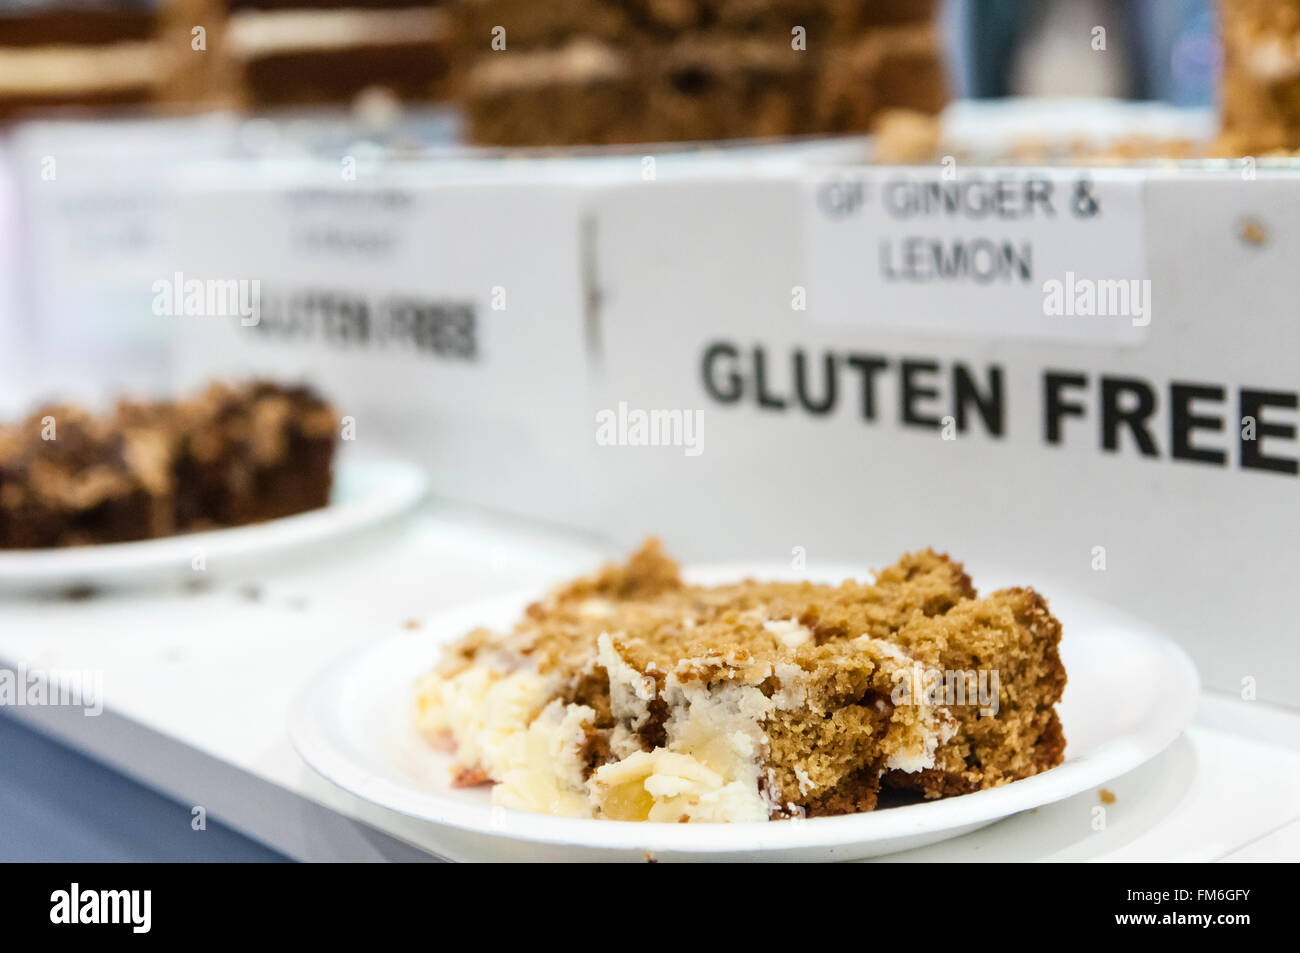 Gluten free cakes on sale in an up-market cafe. Stock Photo